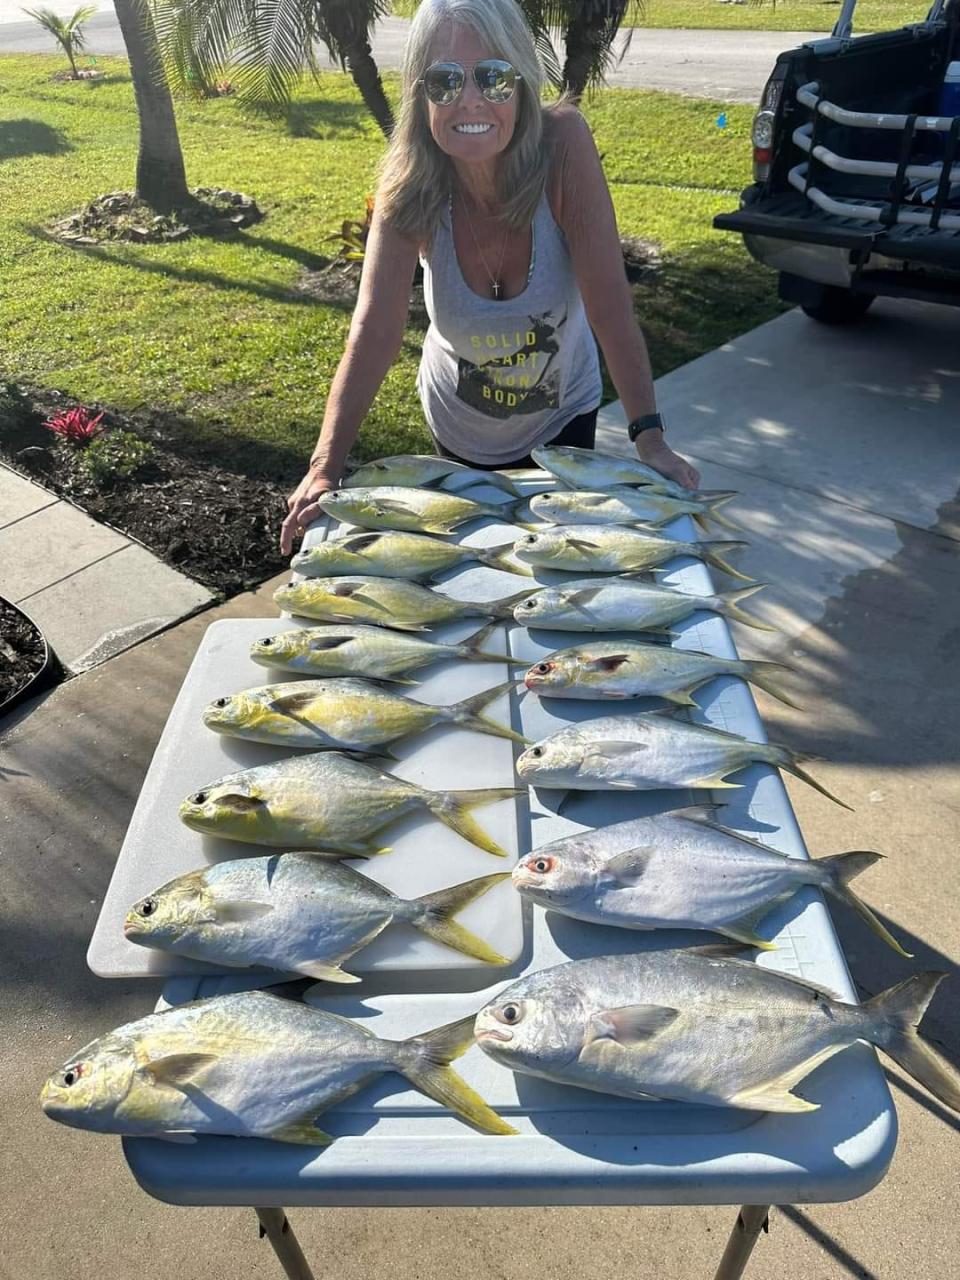 Deb Sperco of Port St. Lucie and husband Paul had a good day of pompano fishing at a Hutchinson Island beach Feb. 27, 2024.